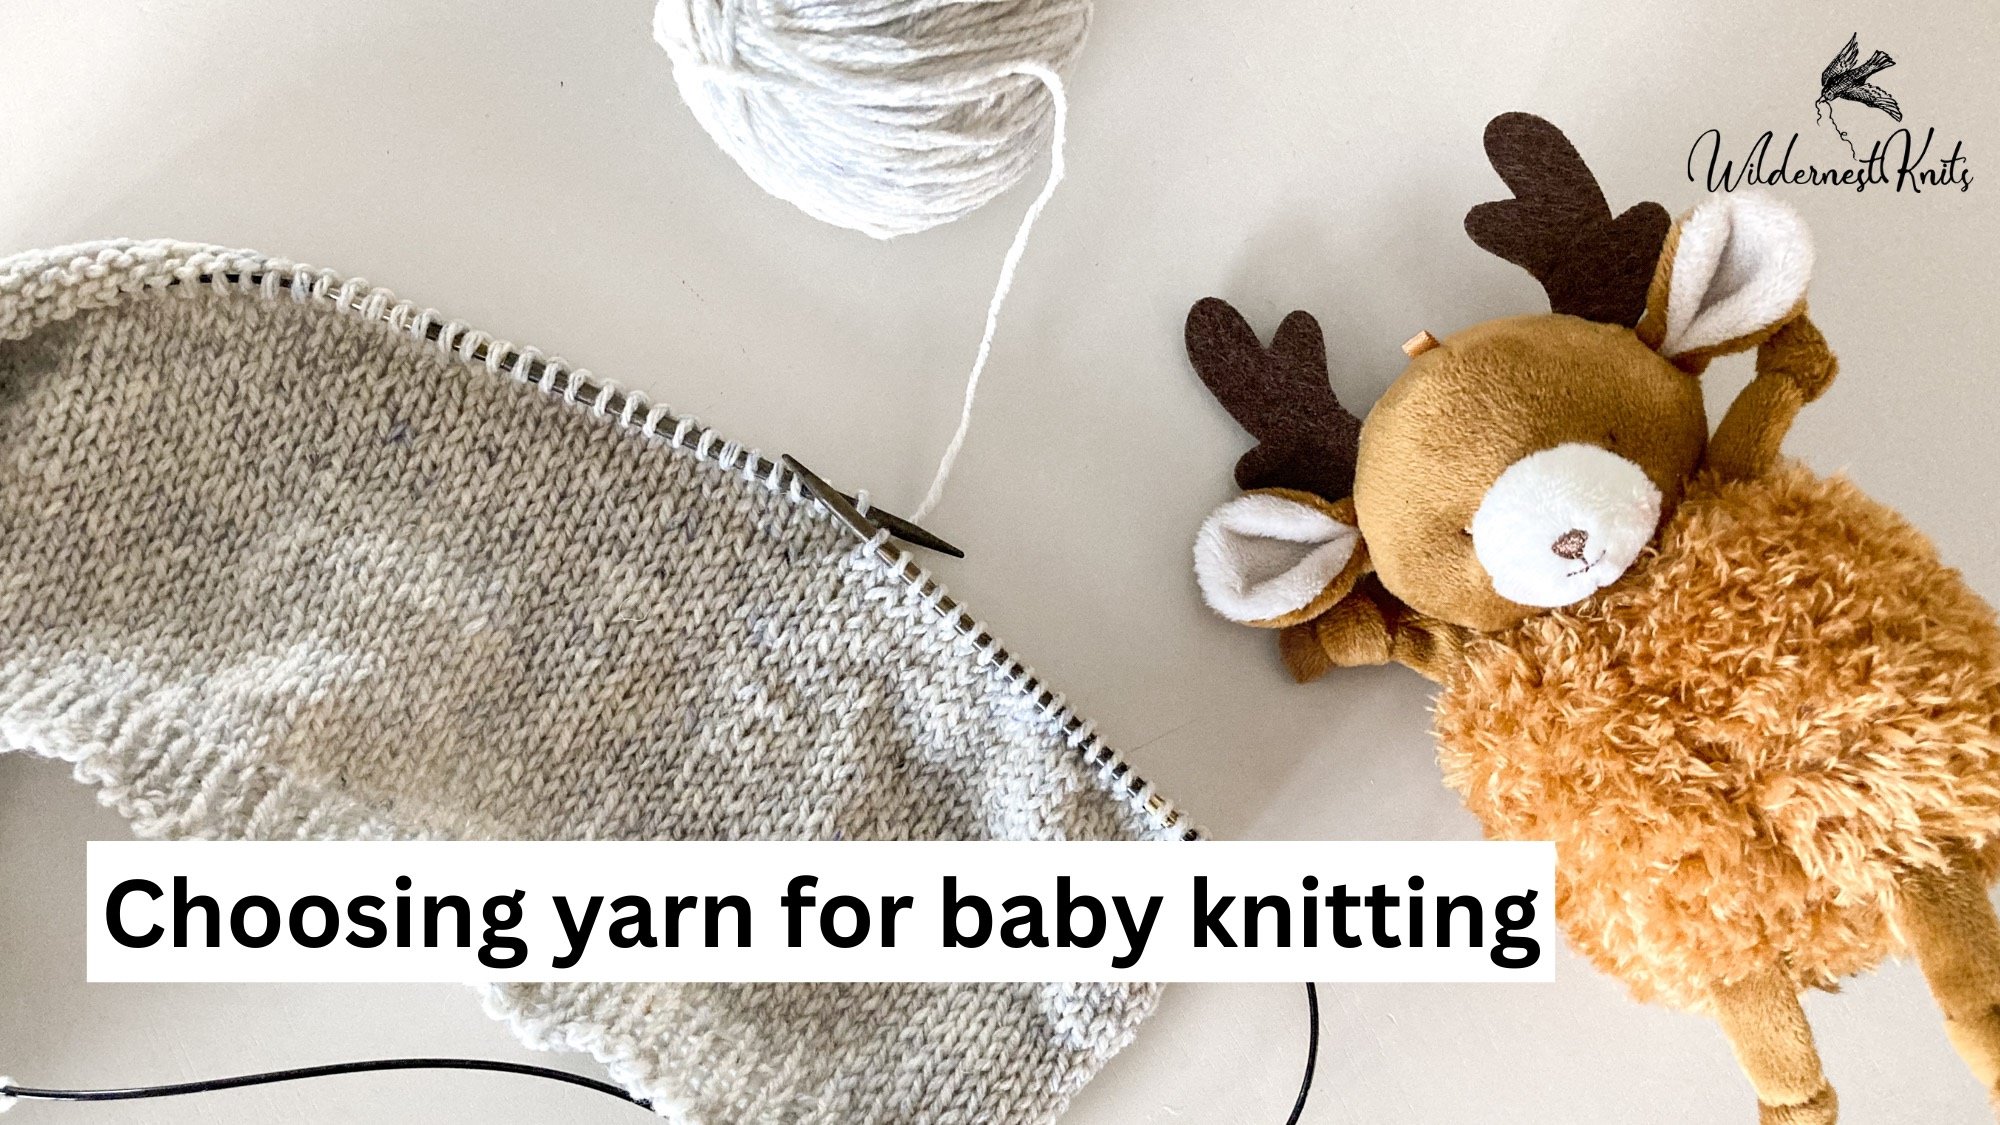 How to knit sea animals - Free Knitting machine pattern - A Crafty Concept